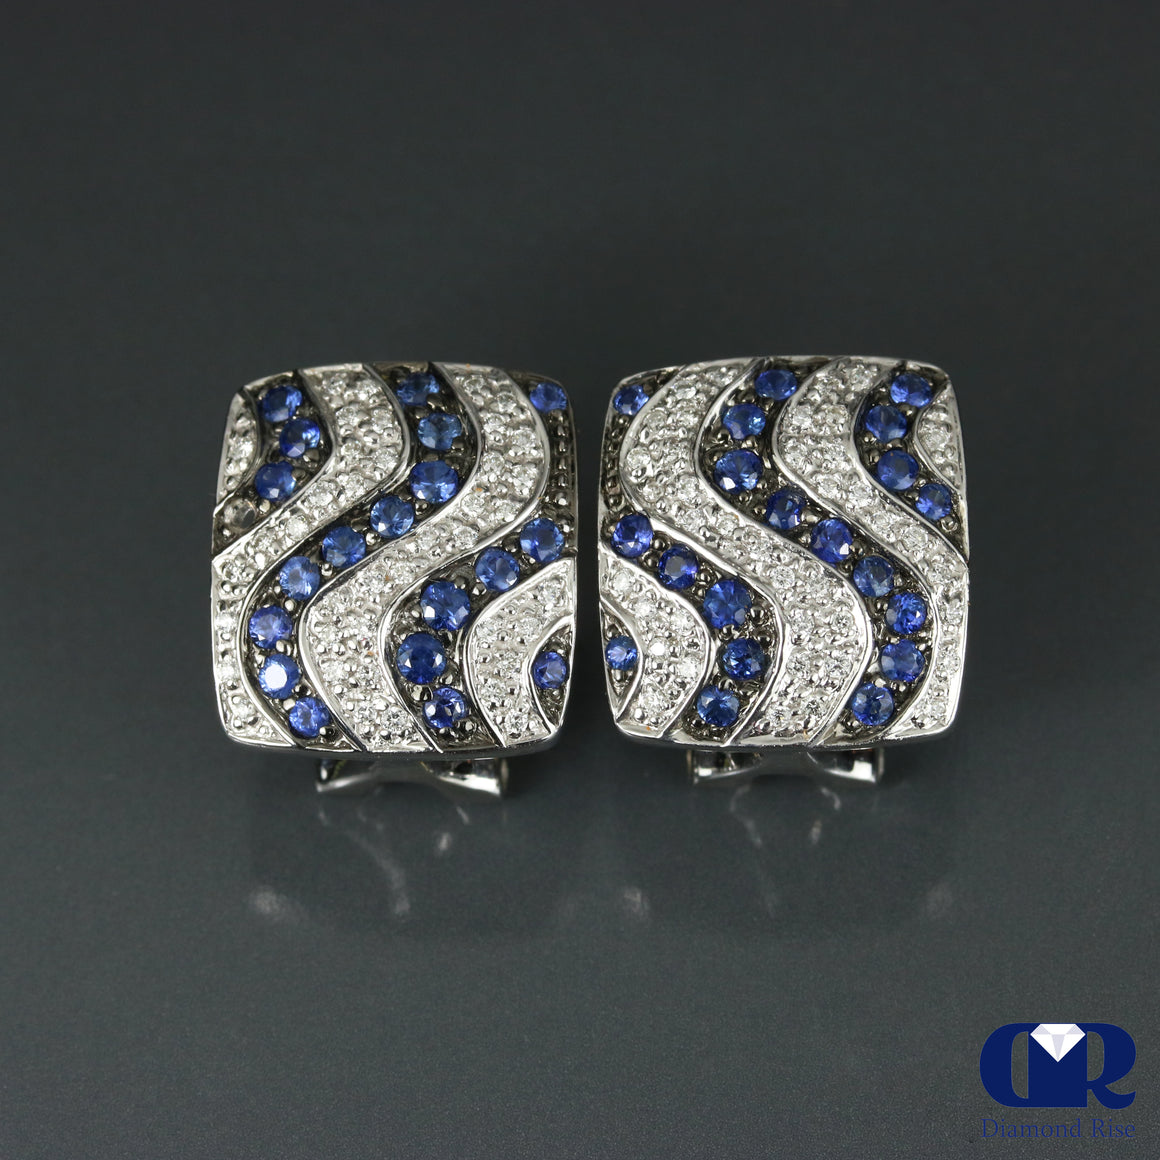 1.45 Ct Diamond & Sapphire Earrings In 14K White Gold With Omega Back - Diamond Rise Jewelry